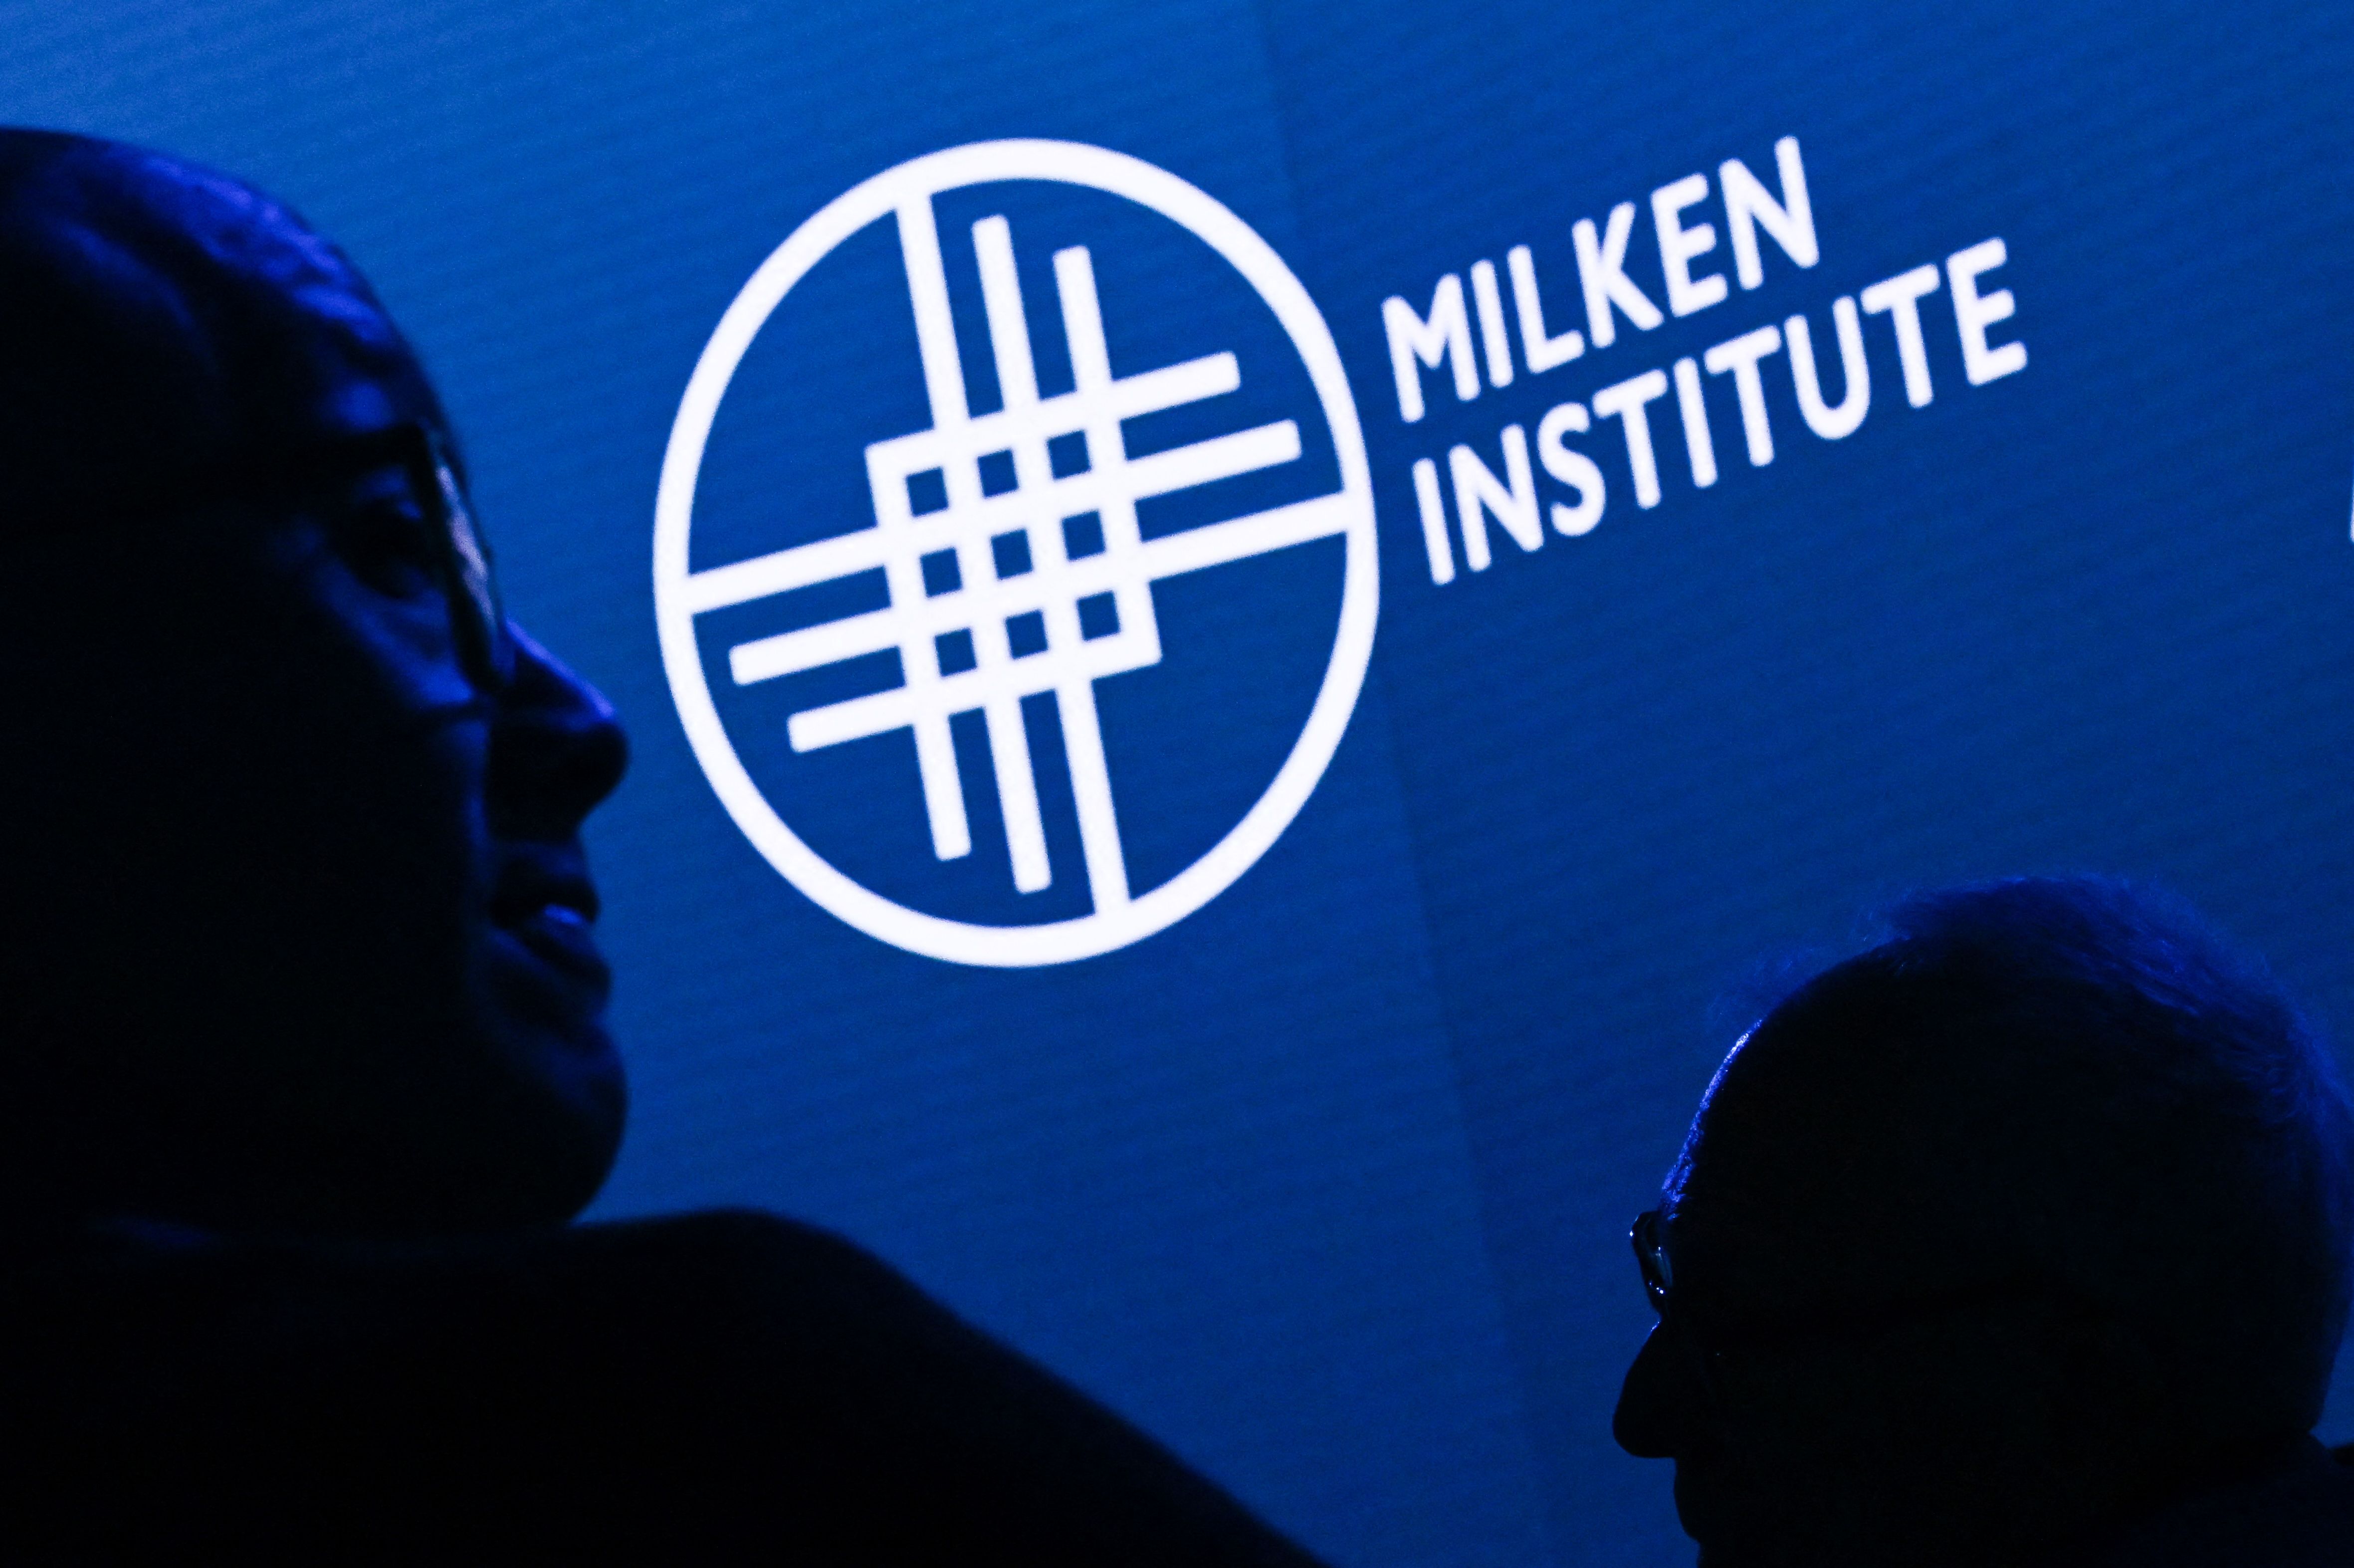 Milken Institute Global Conference Day 3 Recession Fears, Fed Rate